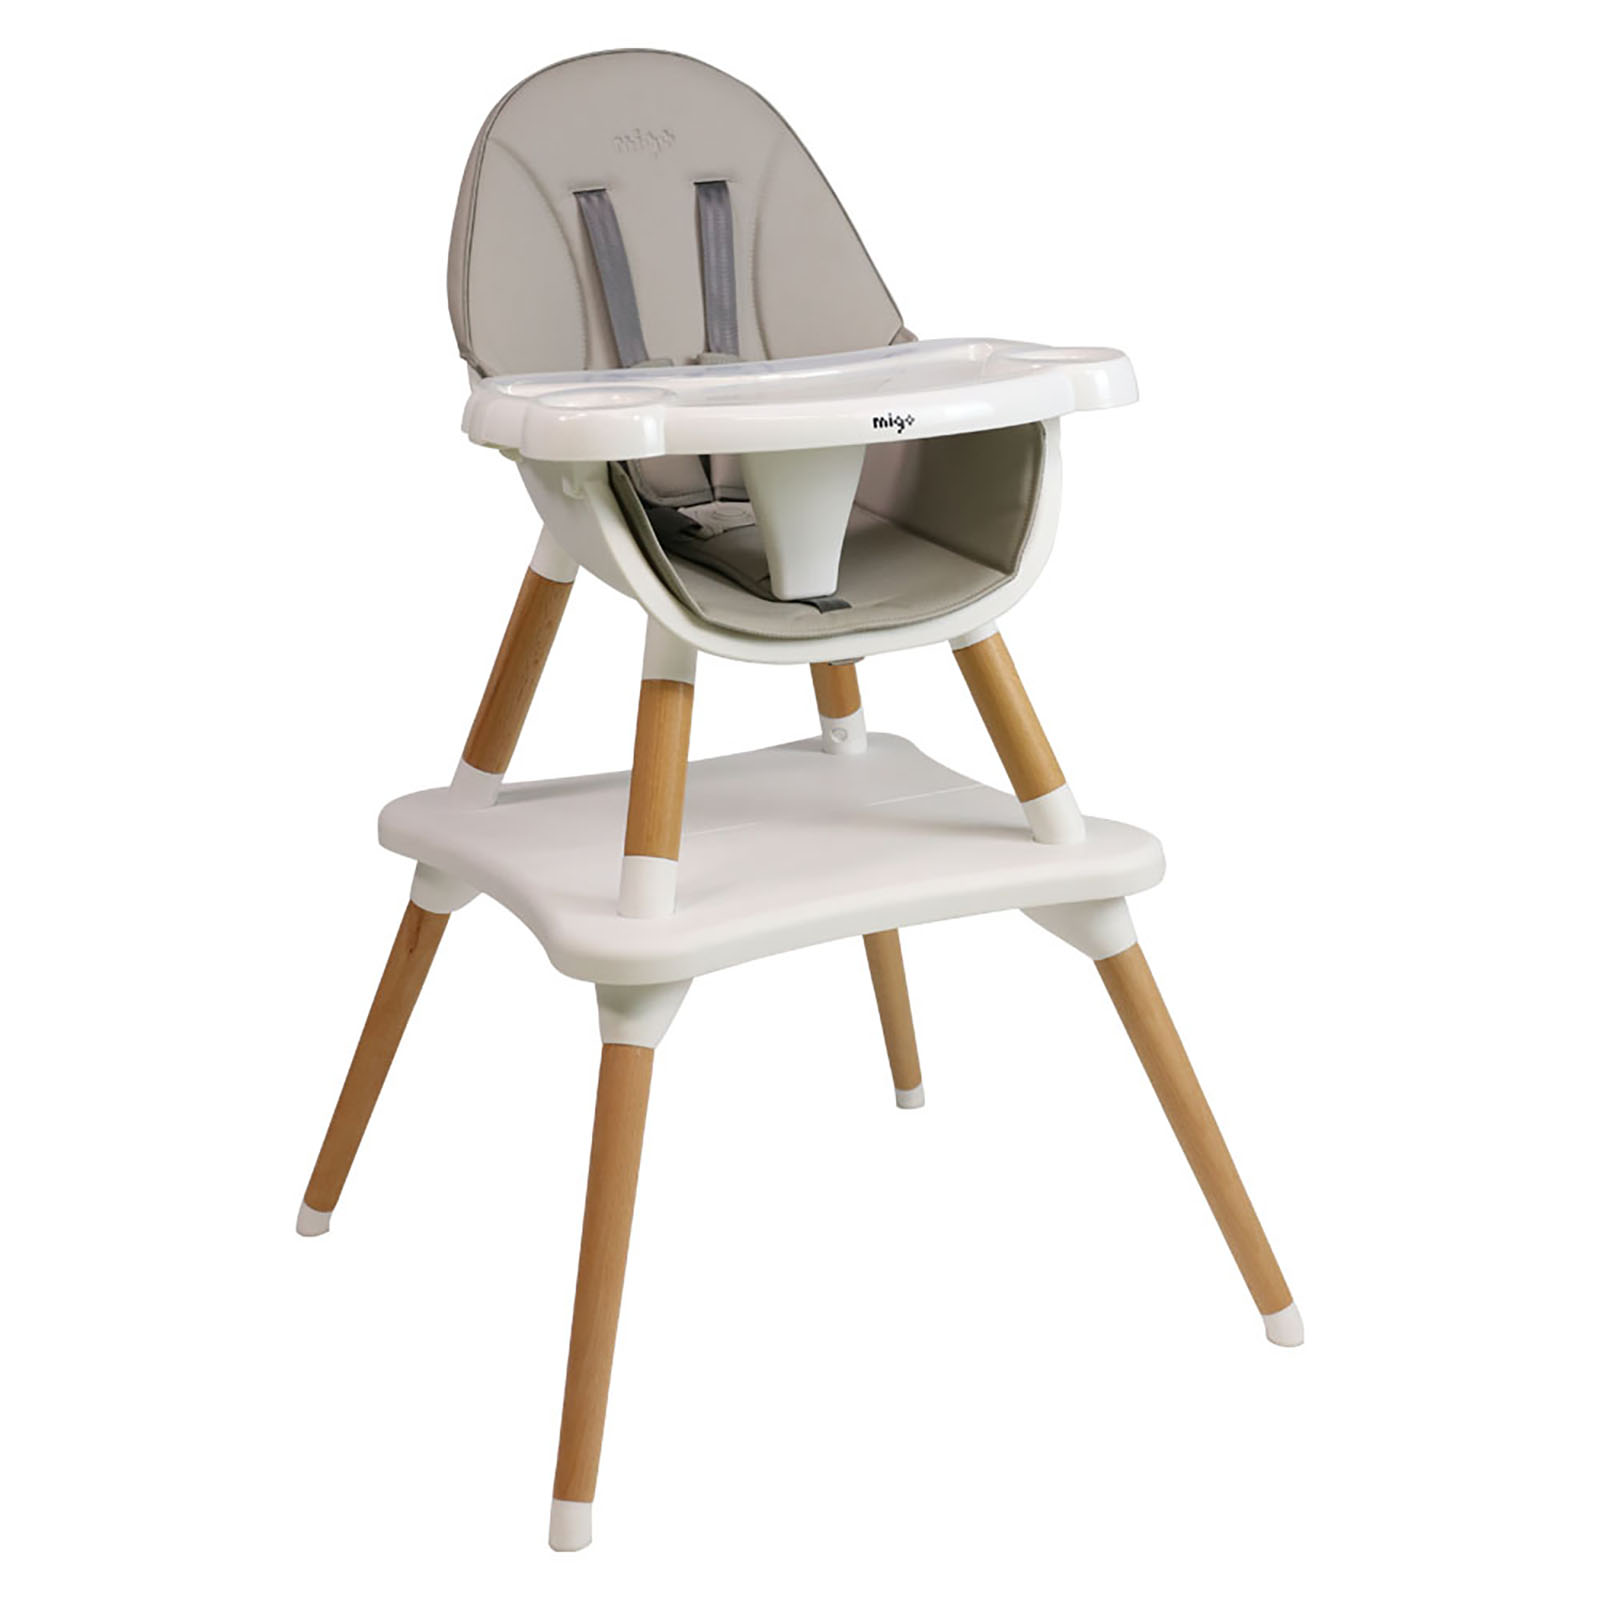 Eva 2in1 High Chair and Convertible Desk & Chair - Grey / White | Buy ...